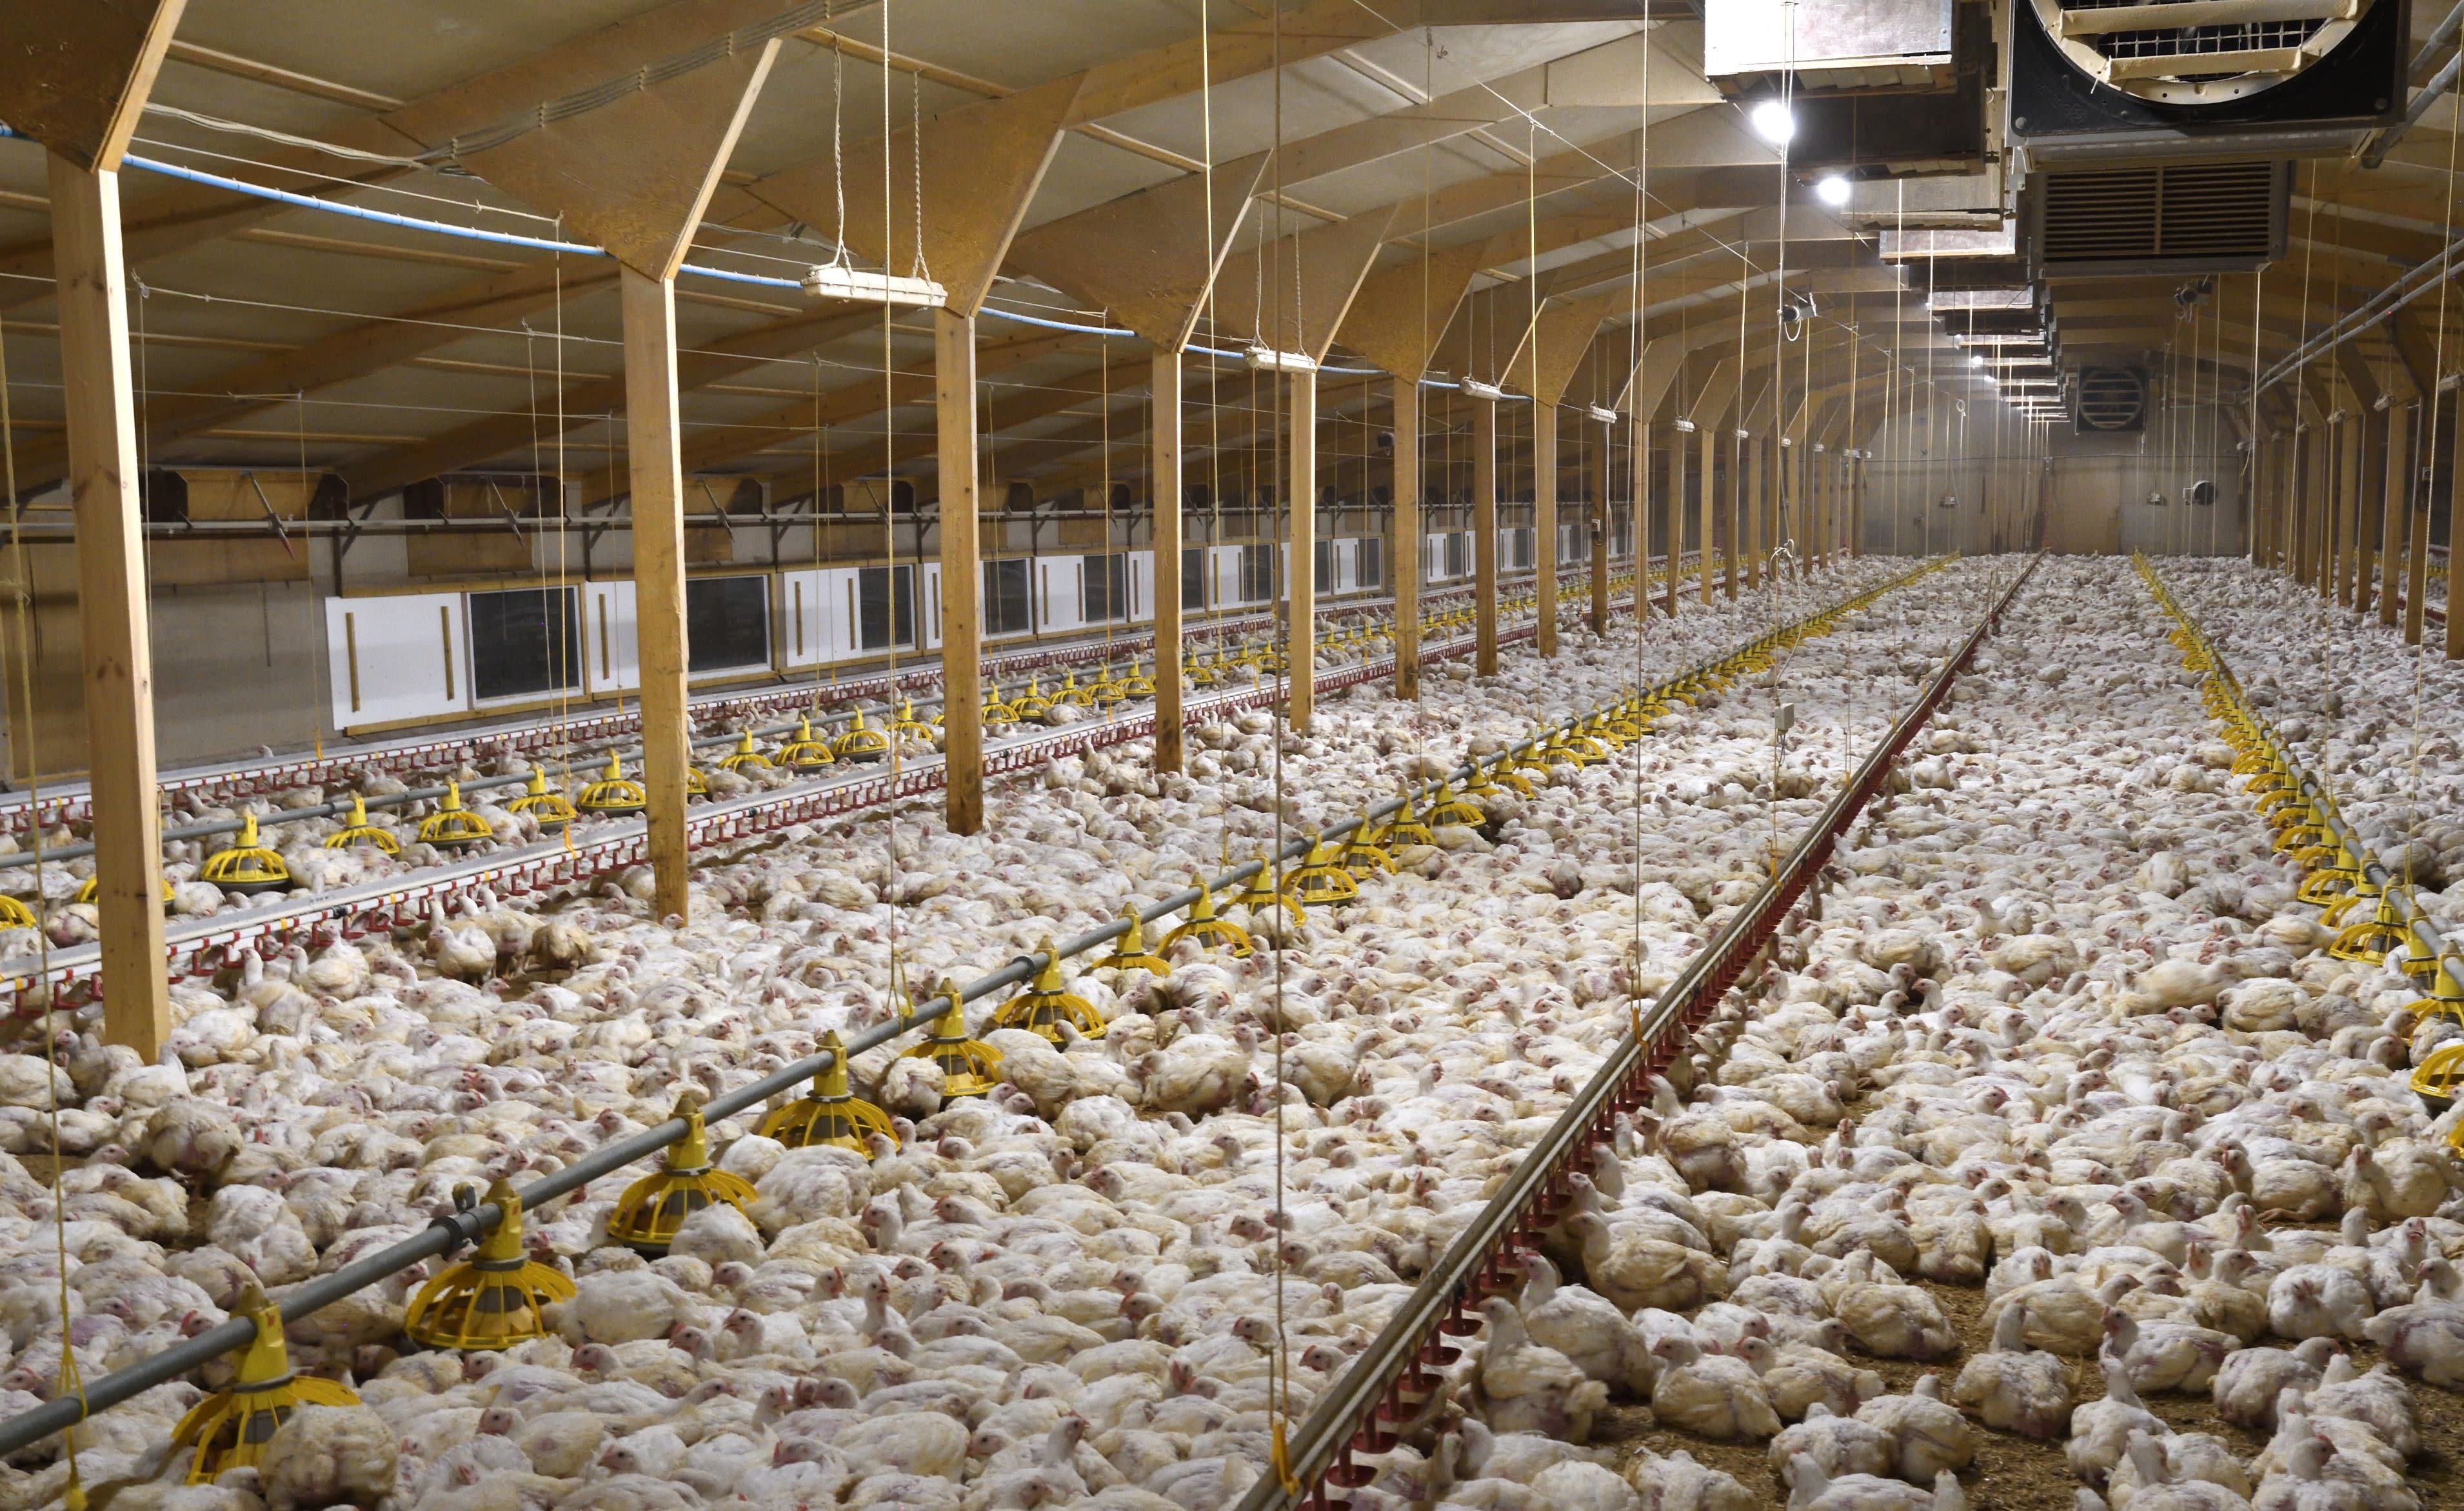 Factory-Farmed Chickens: The Cruelty of Chicken Farms